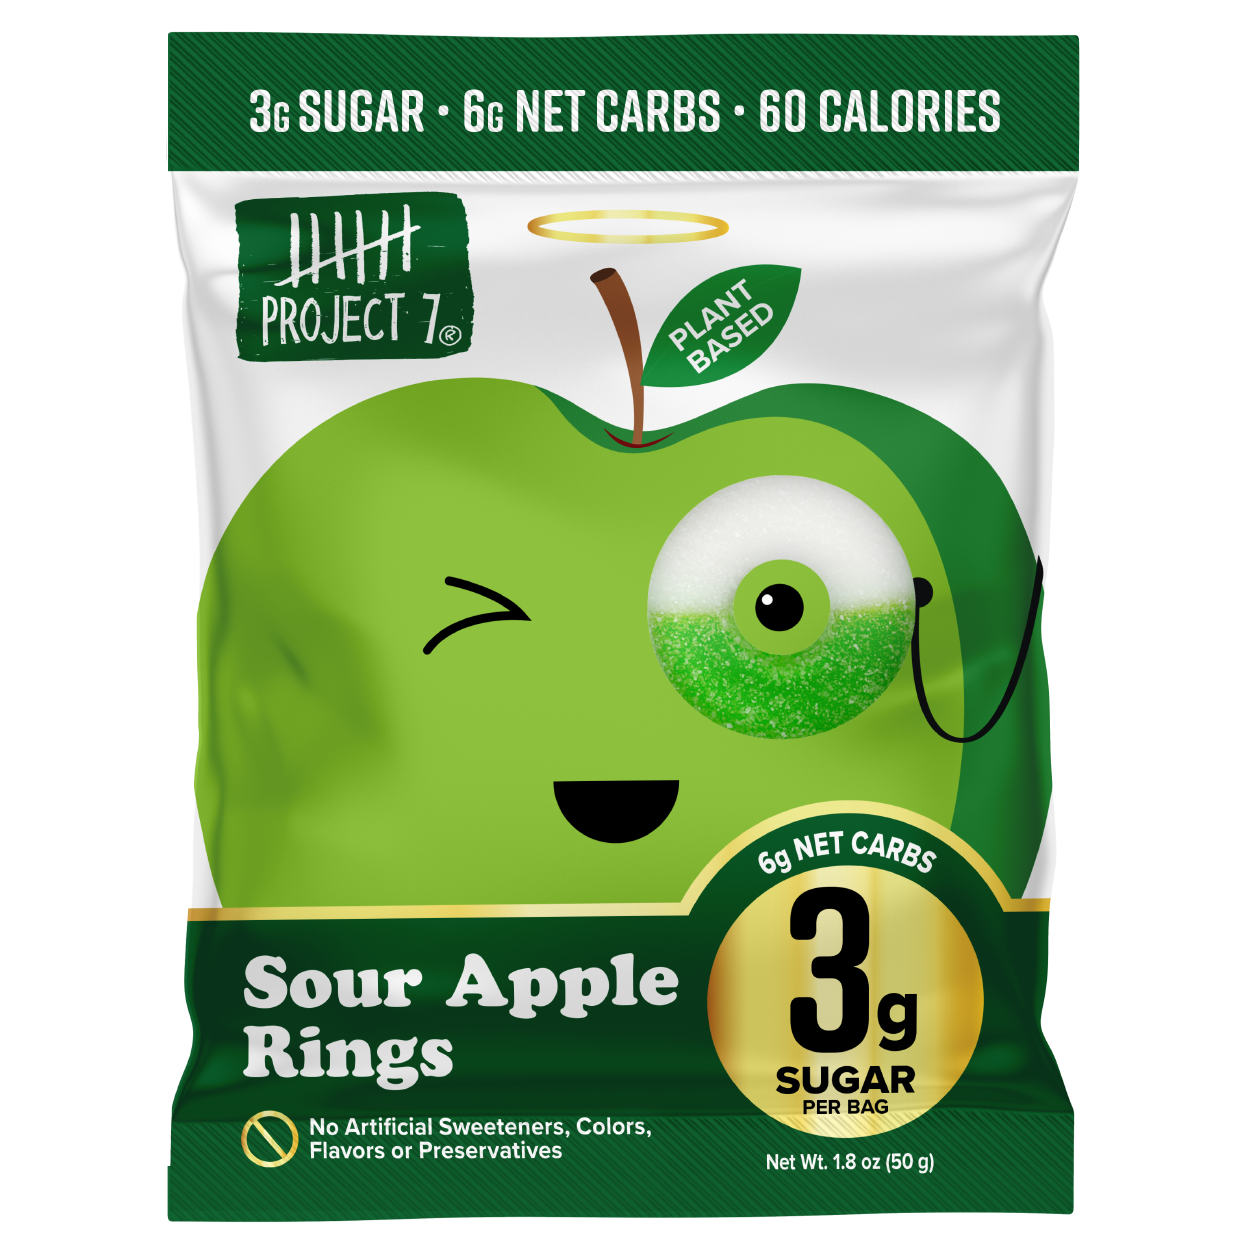 Project 7 Low-Sugar Sour Apple Rings